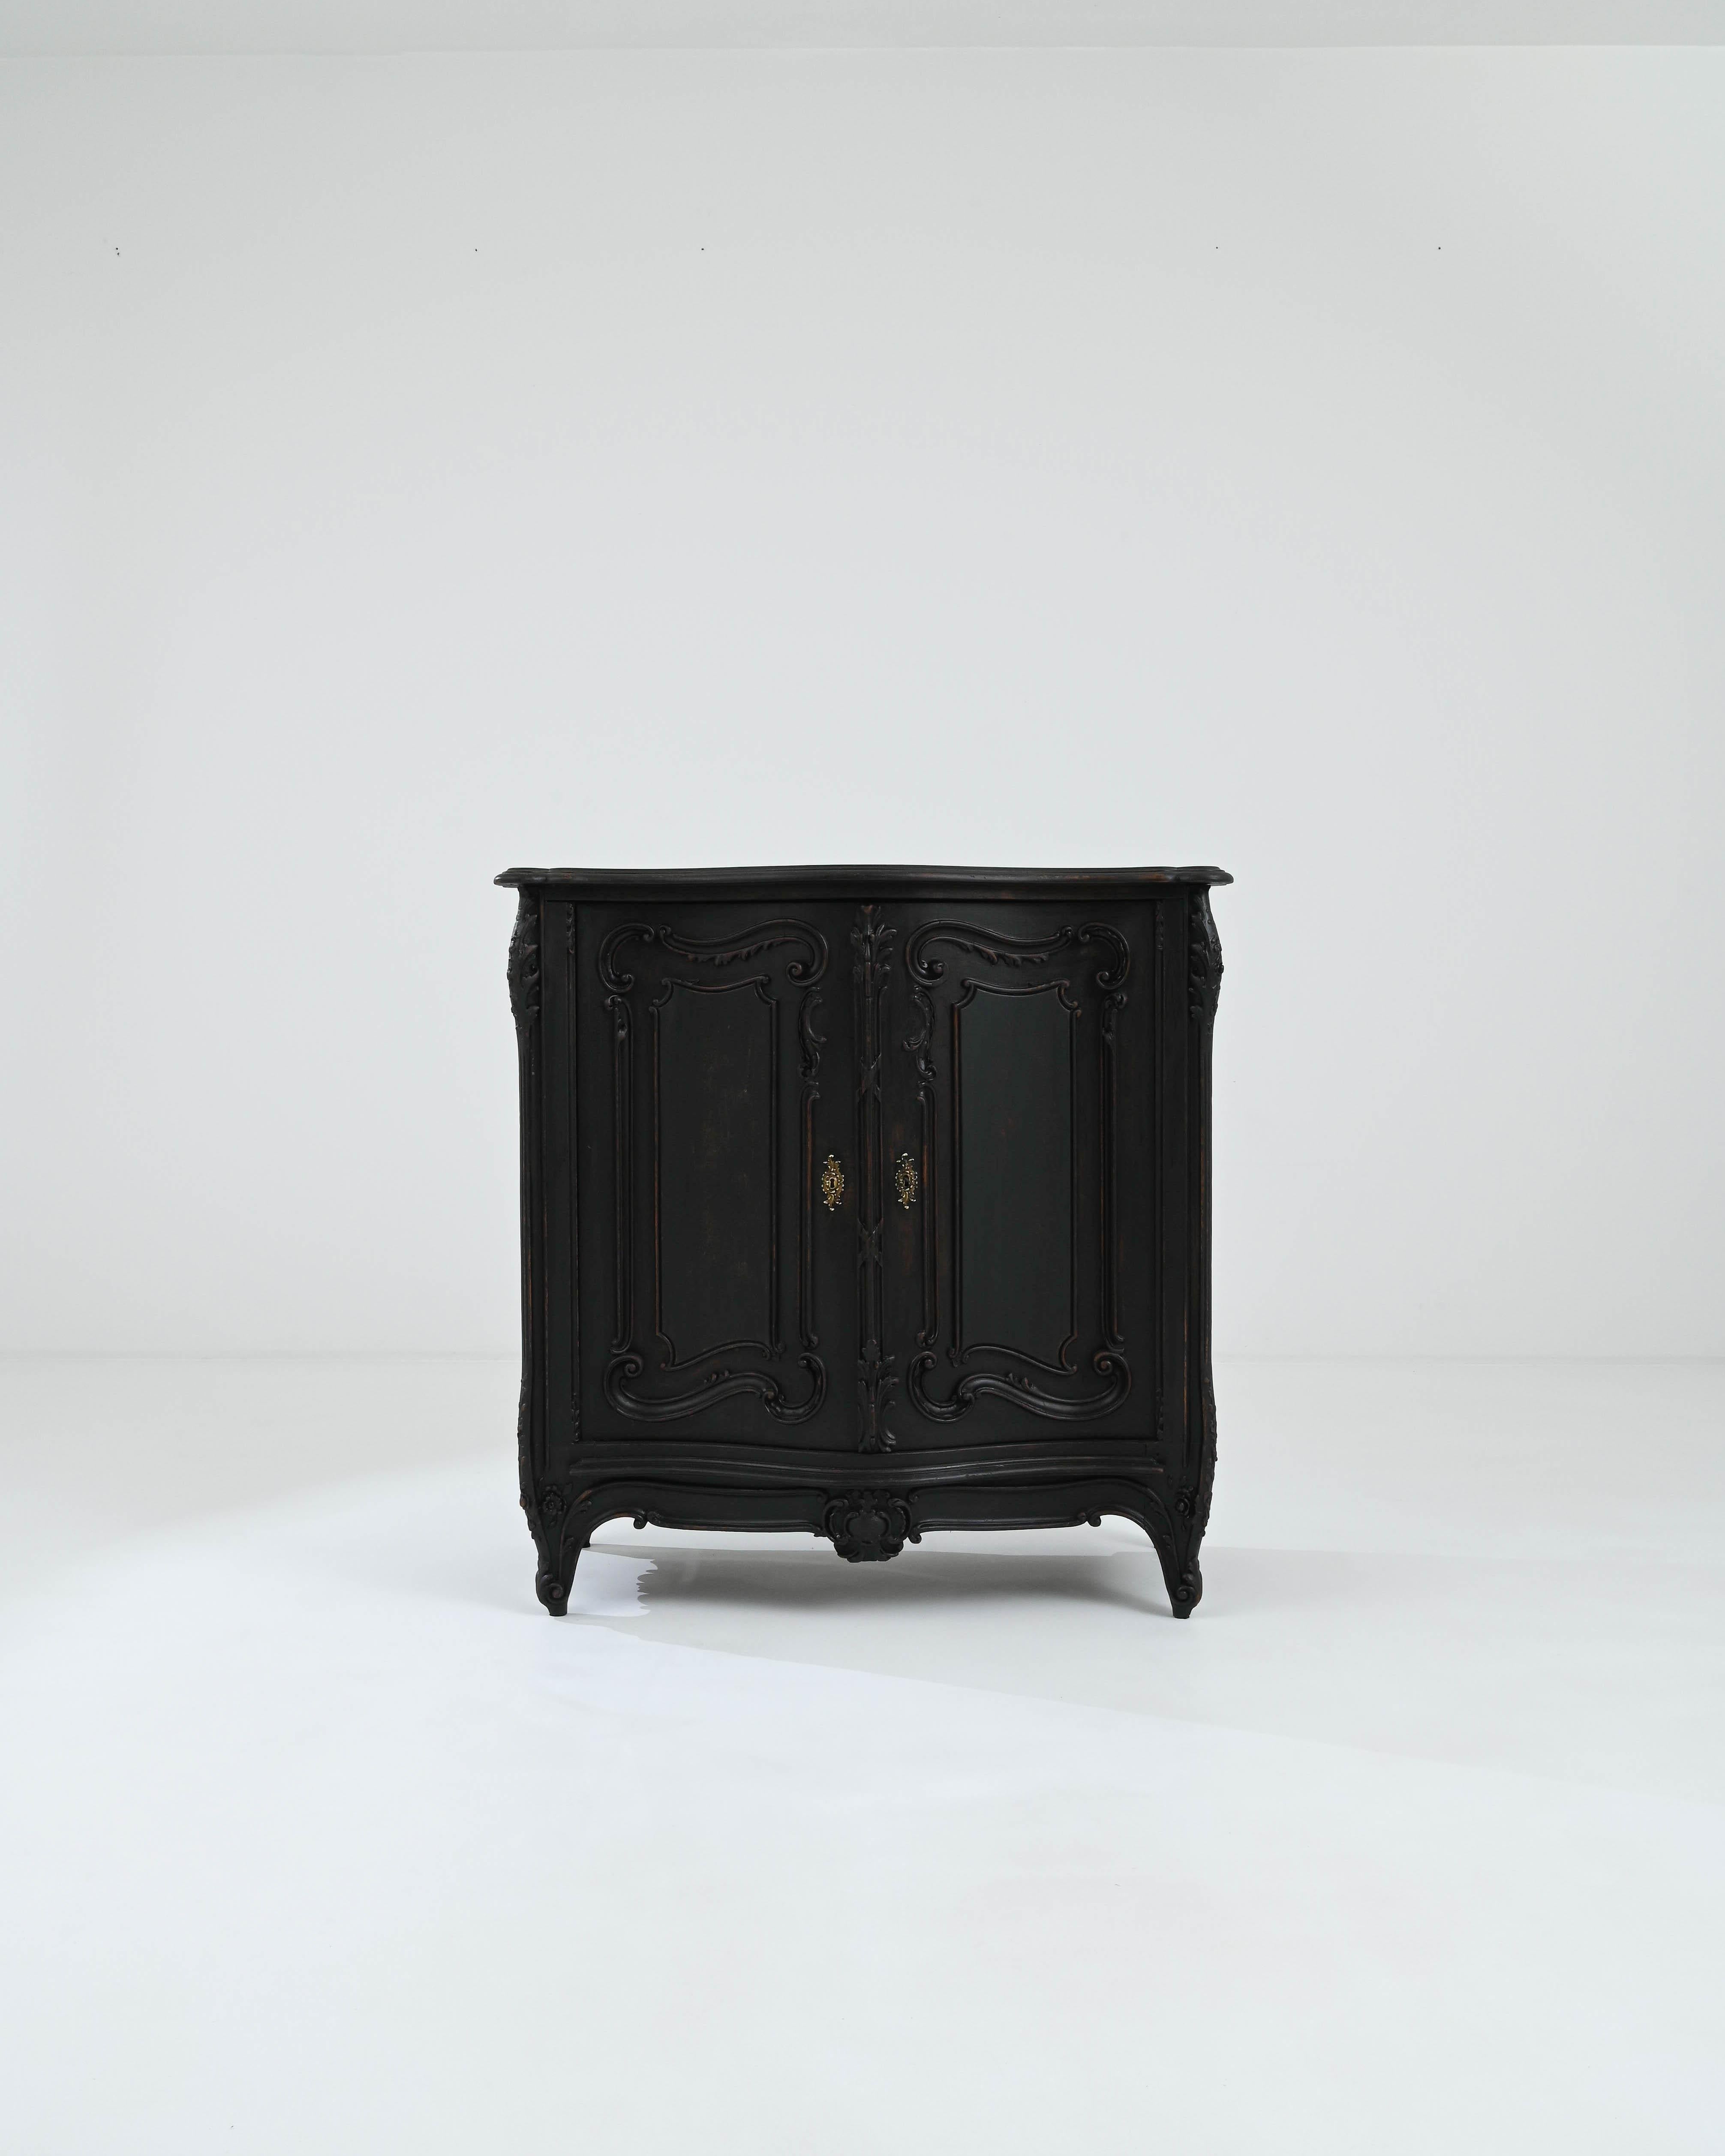 A wooden buffet created in 19th century France. Mysterious and undeniably beautiful, this classically sculpted buffet radiates a regality befitting a fairytale. Sumptuous scroll patterns line the paneled doors, aprons, and legs, animating its rich